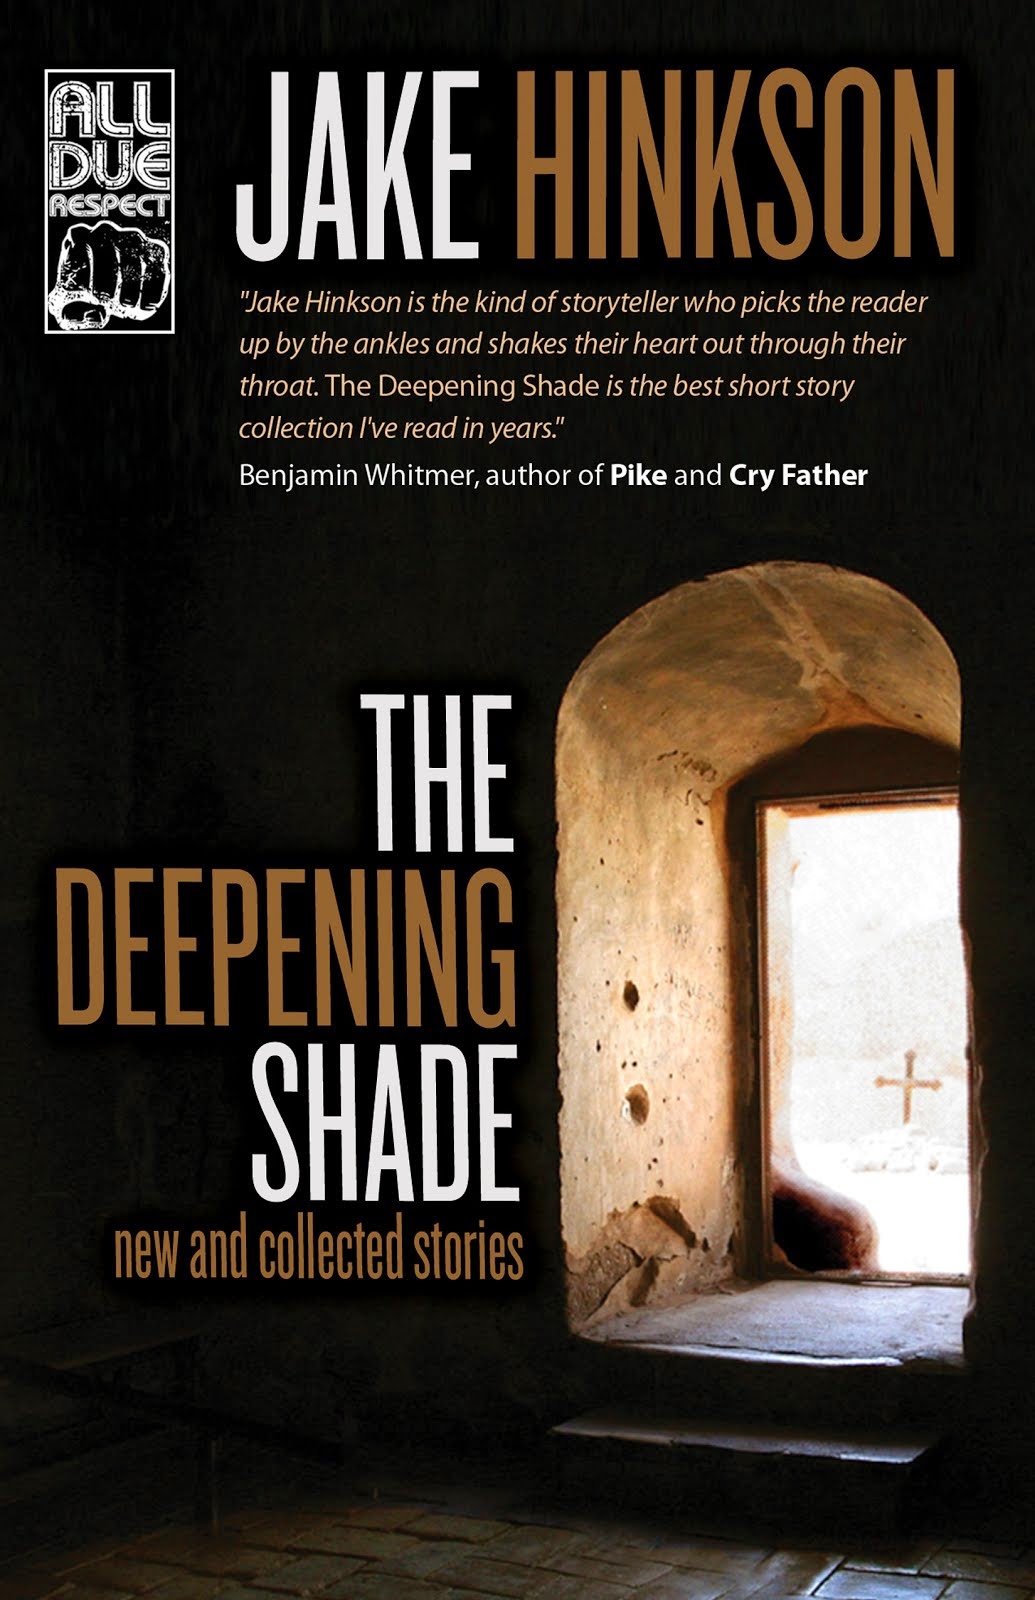 THE DEEPENING SHADE